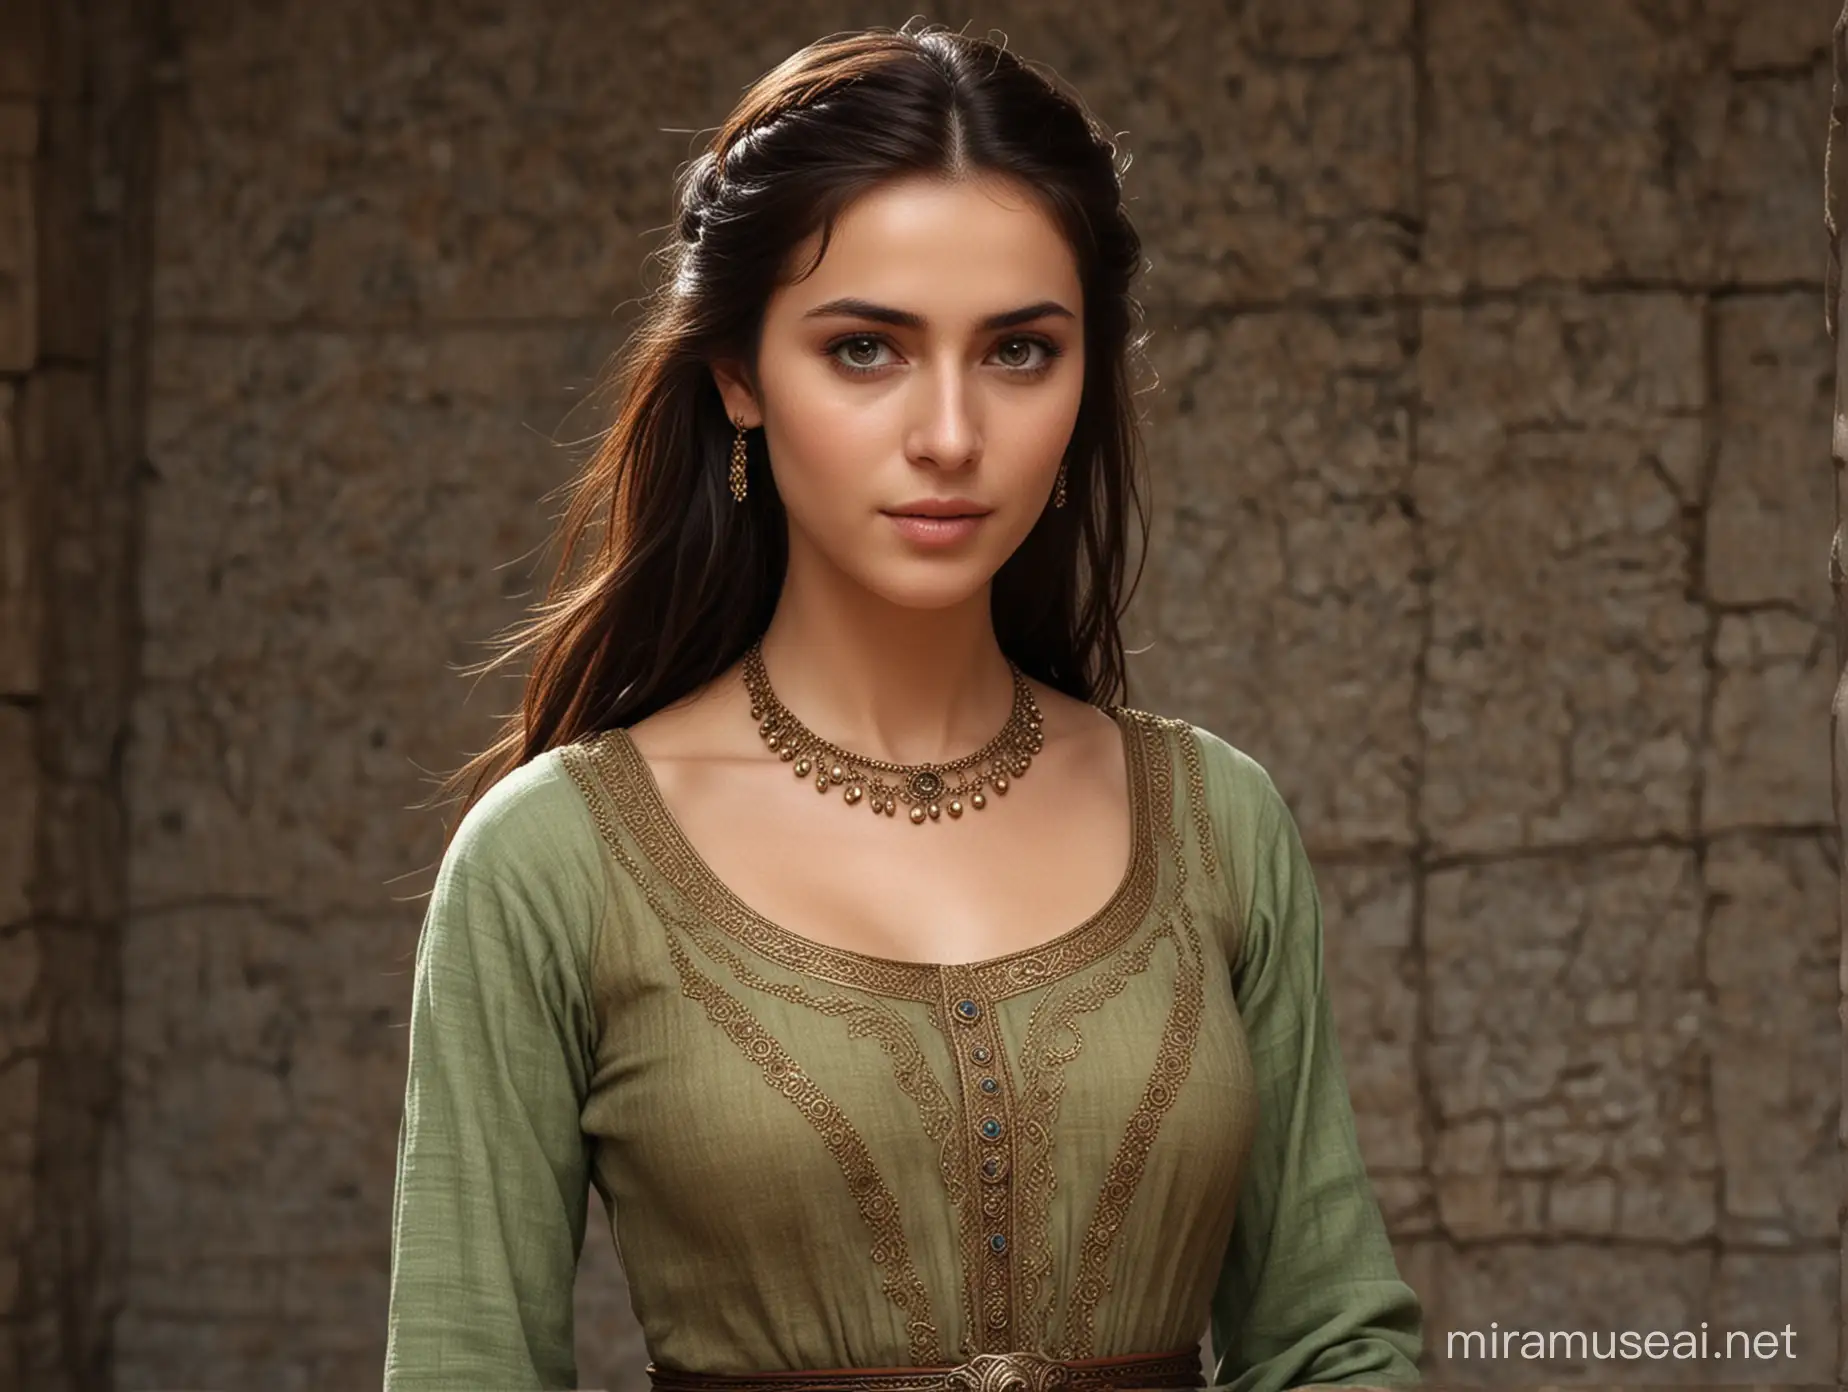 Generate Nestan-Darejan's full body and face, she was the most beautiful woman, chaste and gentle. She lived in the 12th century. Nestan-Darejani is also trapped in the fortress